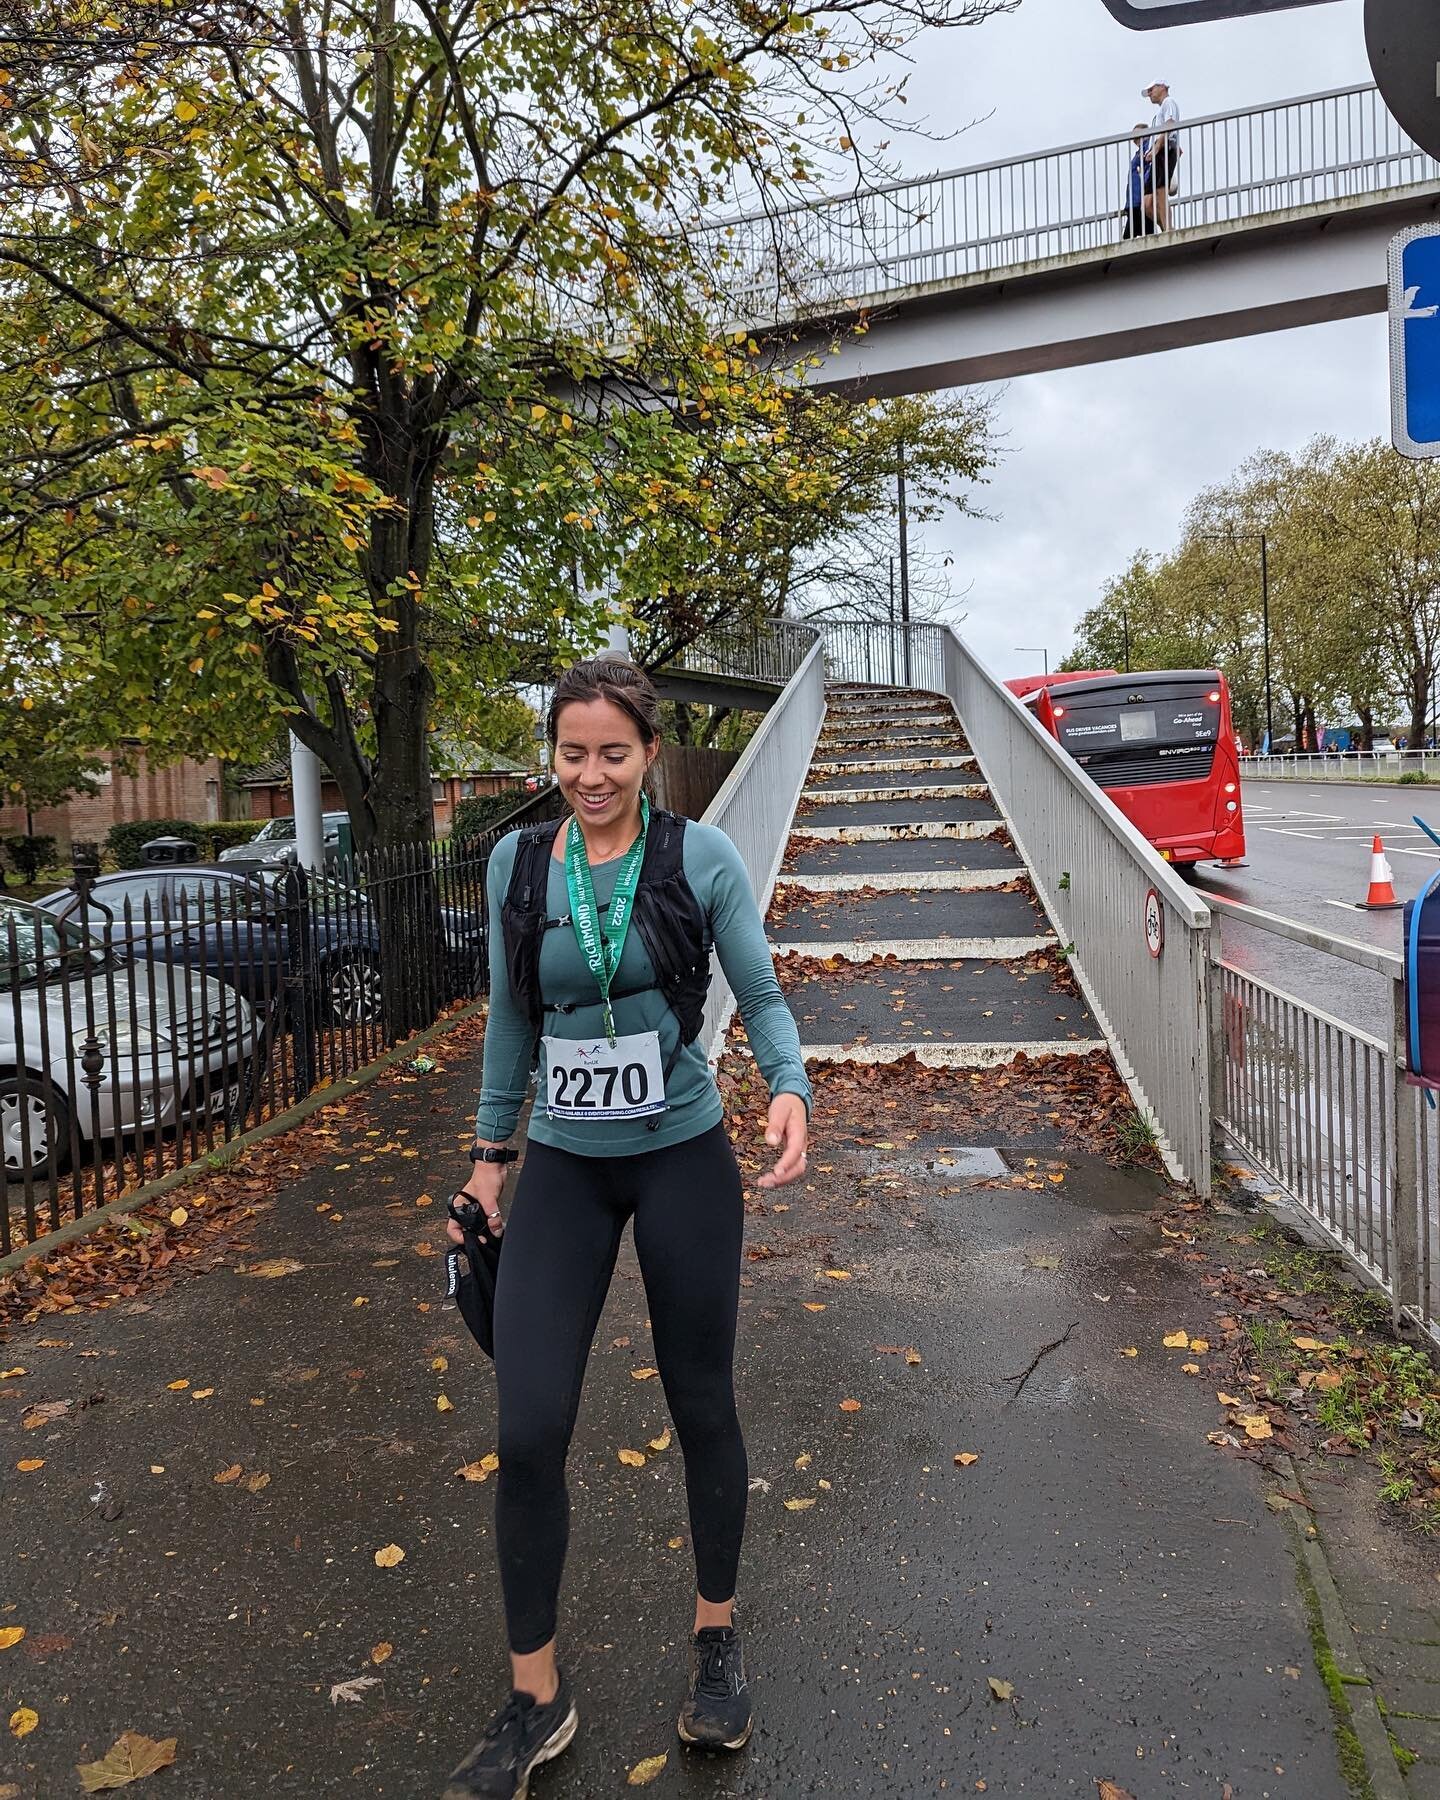 First Half Marathon Completed ✅ 

After missing out on the @runbristolhalf, I still wanted to sneak one in before the end of the year, so I entered into the (very wet and muddy) @richmond_halfmarathon.

Over the moon to finish in 1.49 having aimed fo